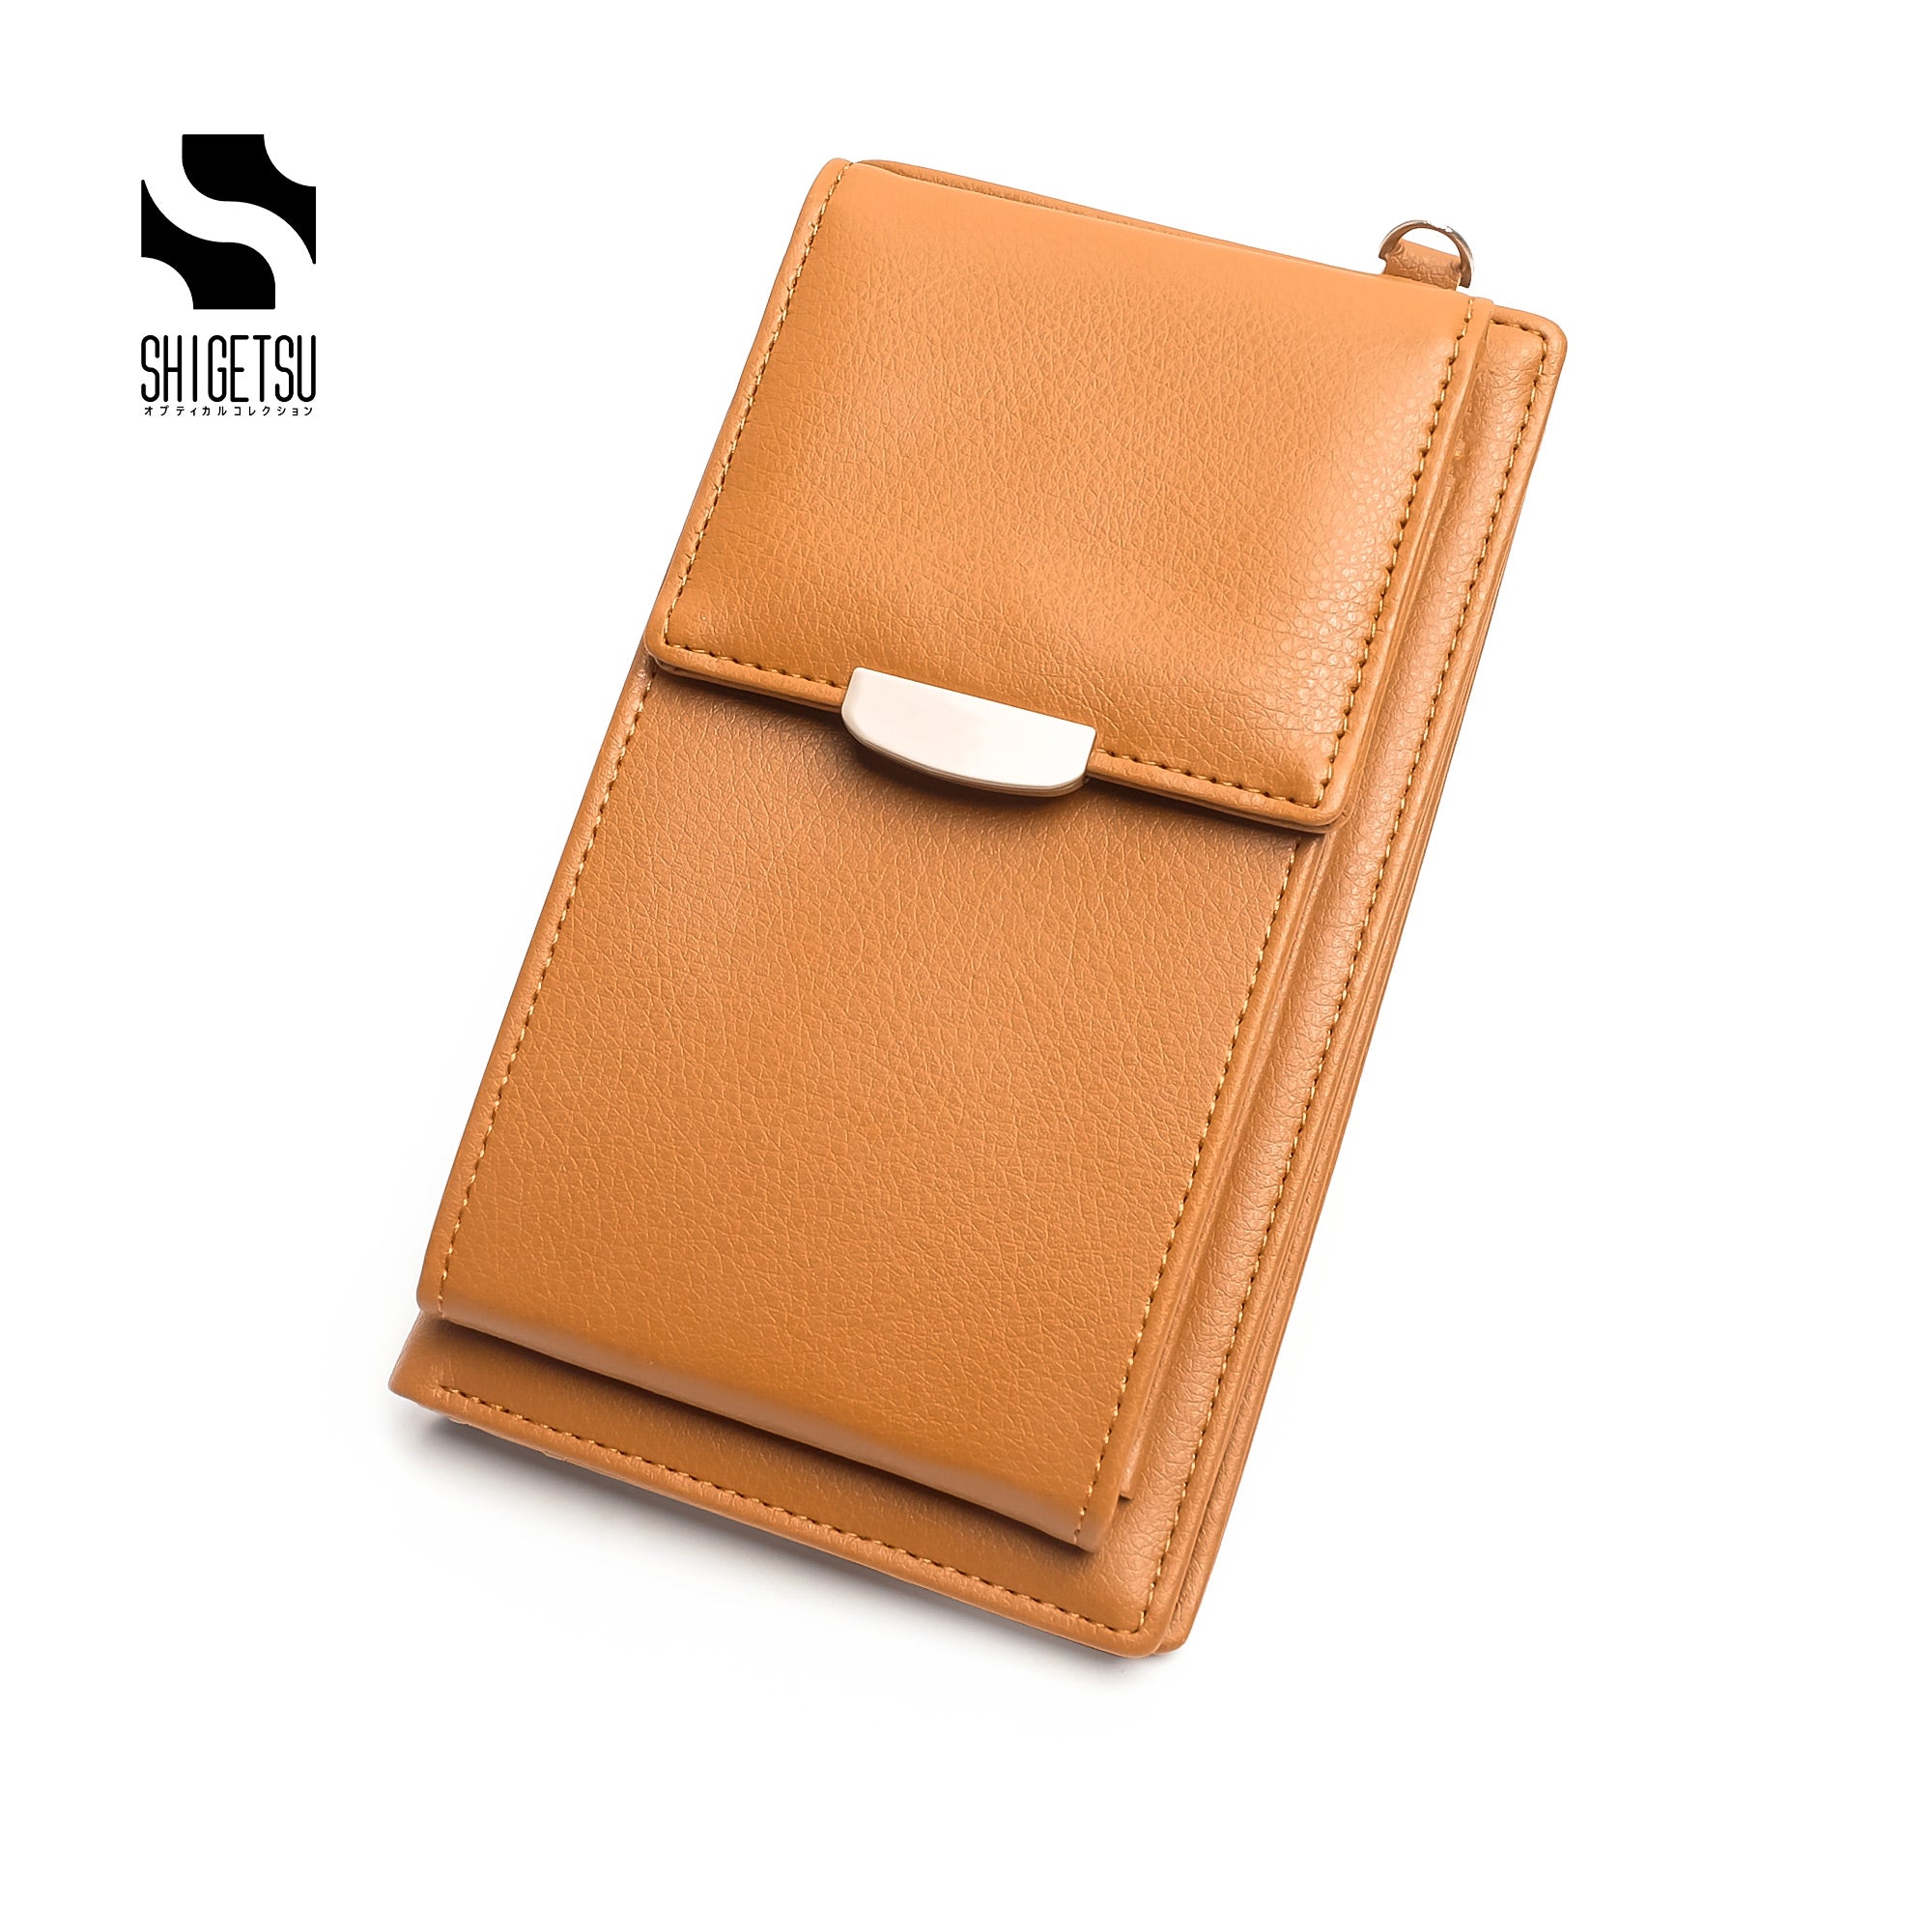 Shigetsu TONAMI Leather Folding Wallet with Attached Flip Pocket for Women